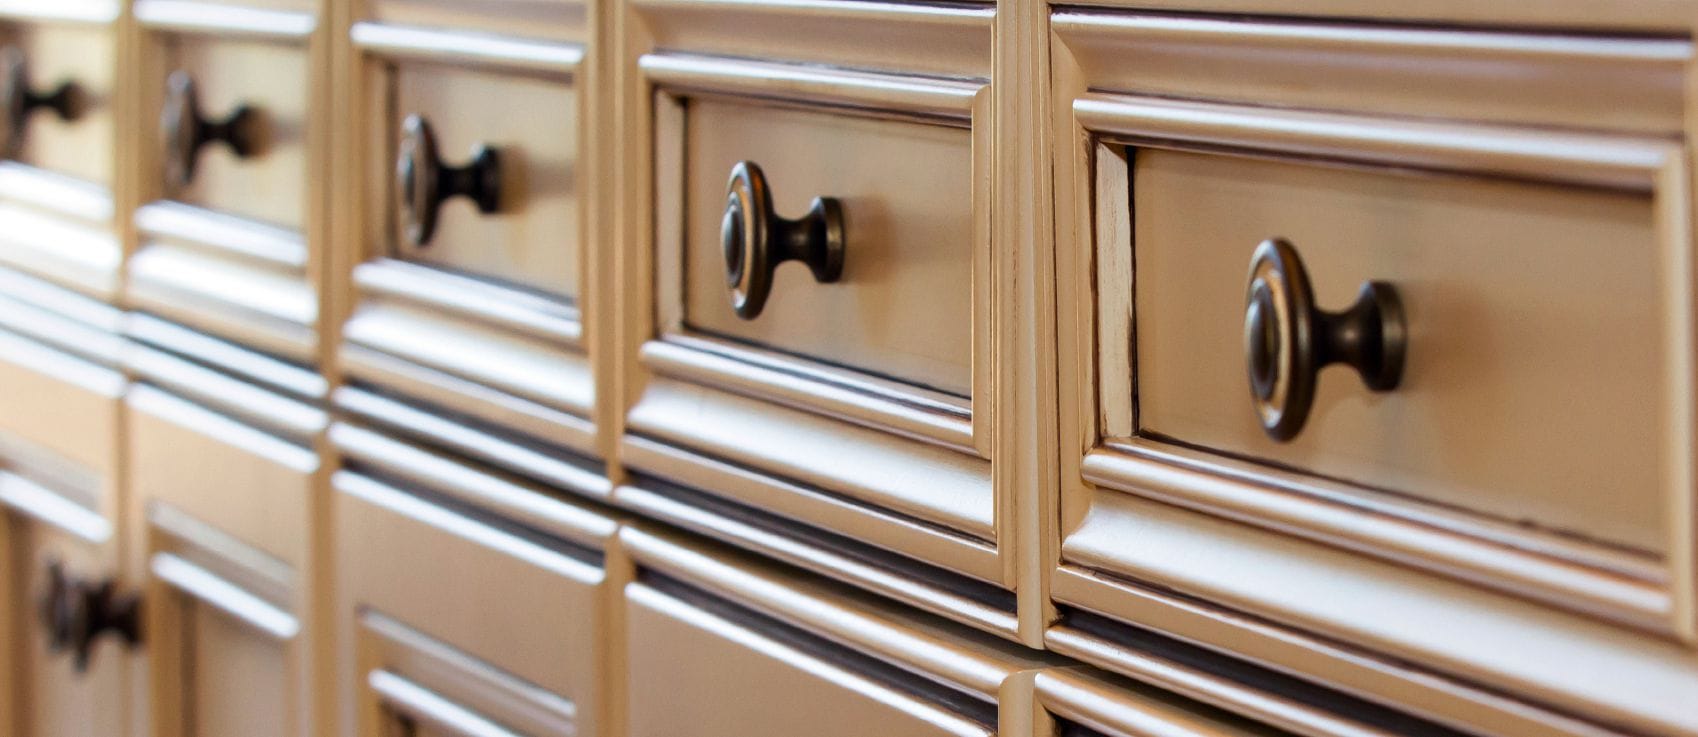 Kitchen Cabinet Knobs Pulls And Handles